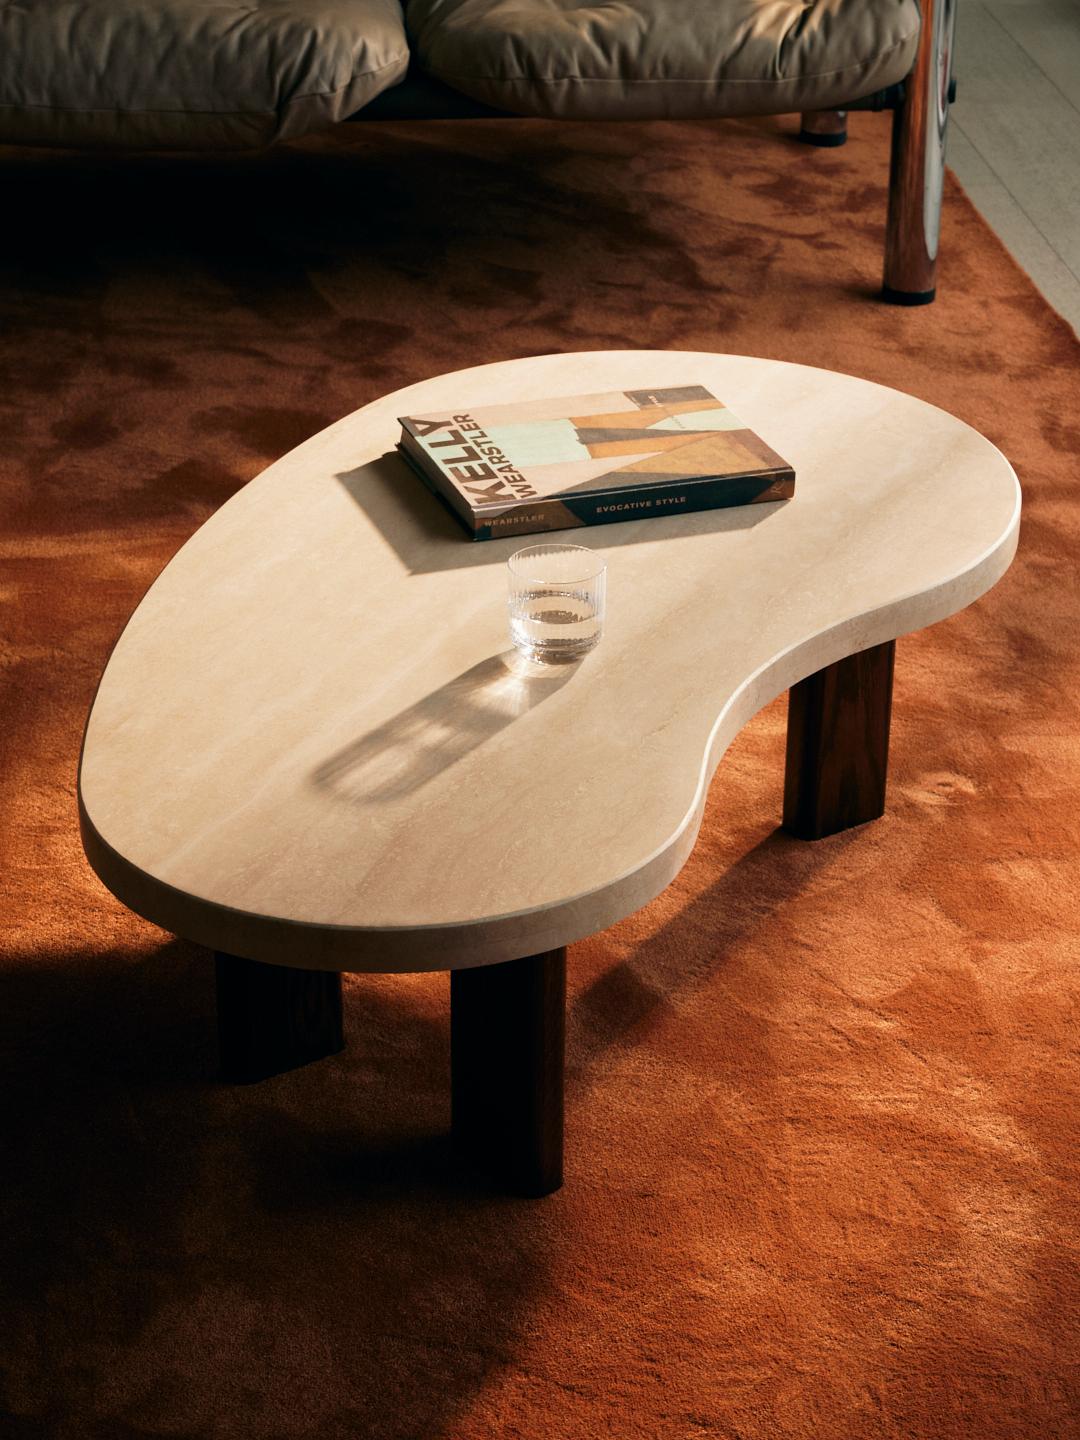 Rene Coffee Table in Walnut stained natural oak and Travertine. 

Designed by Just Adele and handcrafted locally by skilled Artisans. 

Organic shapes with soft curved edges, elevated by the perfect mix of natural materials; stone and solid timber.